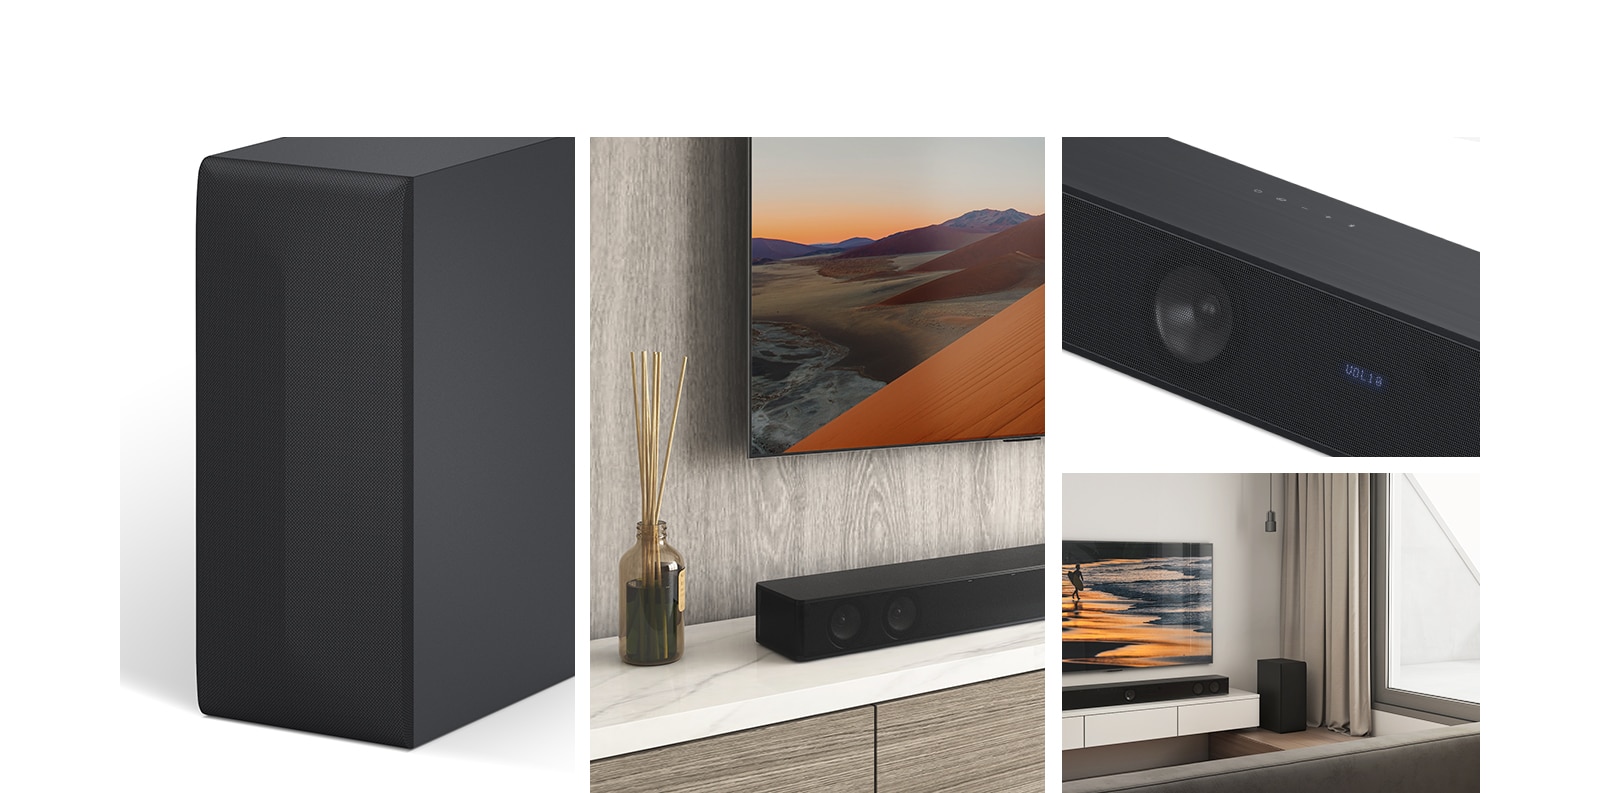 LG SH7Q From left, an image of sub woofer, Close up of LG TV, showing the mountain on the screen and LG Sound Bar below. On the right, from top-bottom: close-up of LG Sound Bar. LG TV, showing a beach at sunset, and LG Sound Bar, sub woofer is placed in the living room.